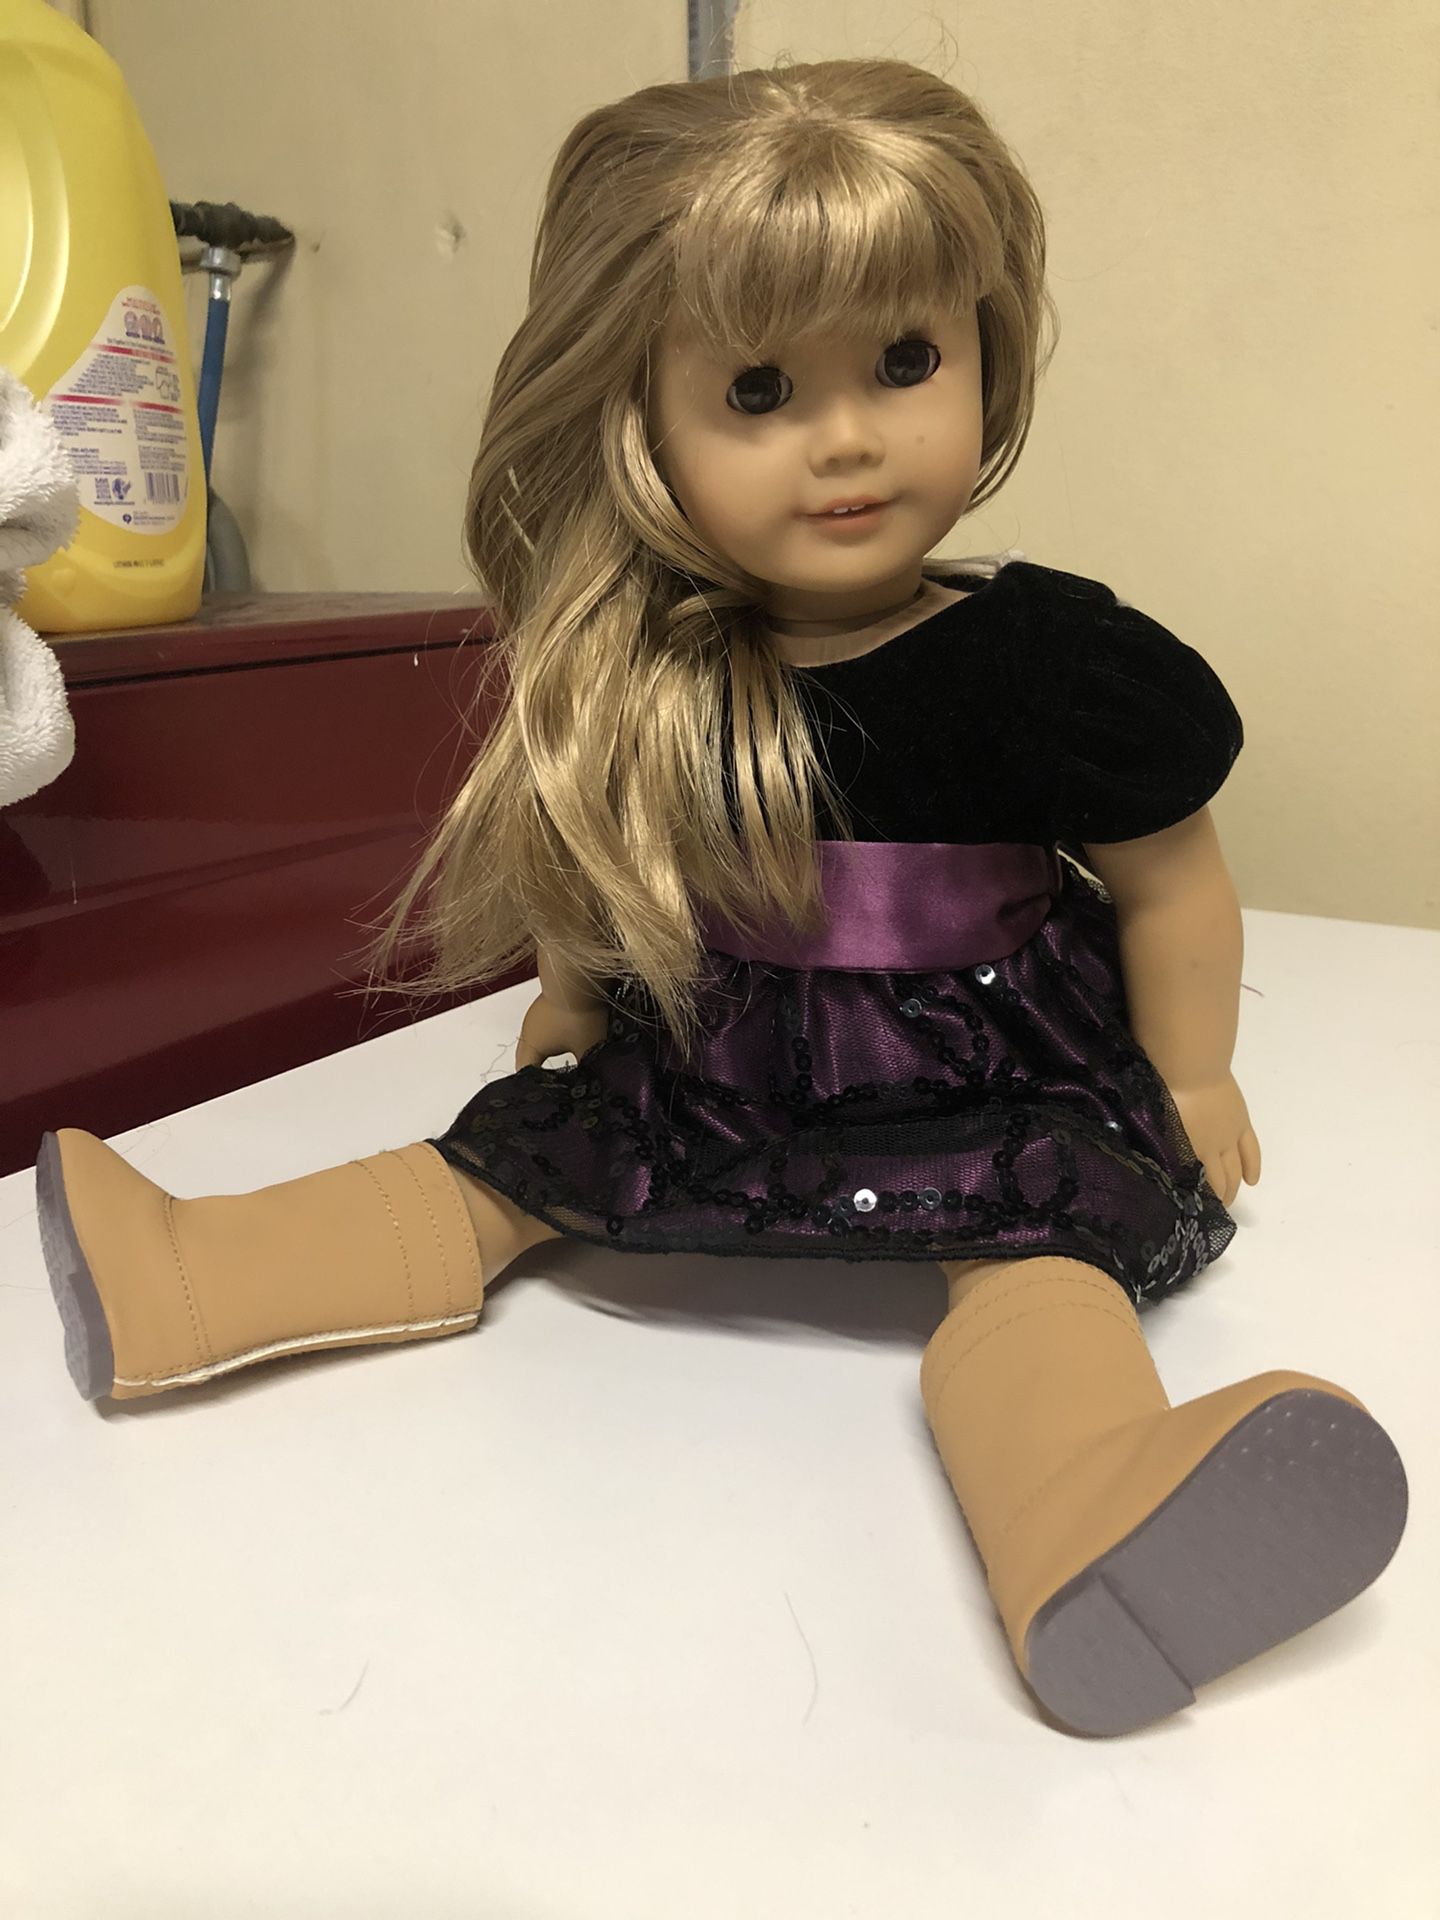 Original American Girl Doll with clothes and shoes